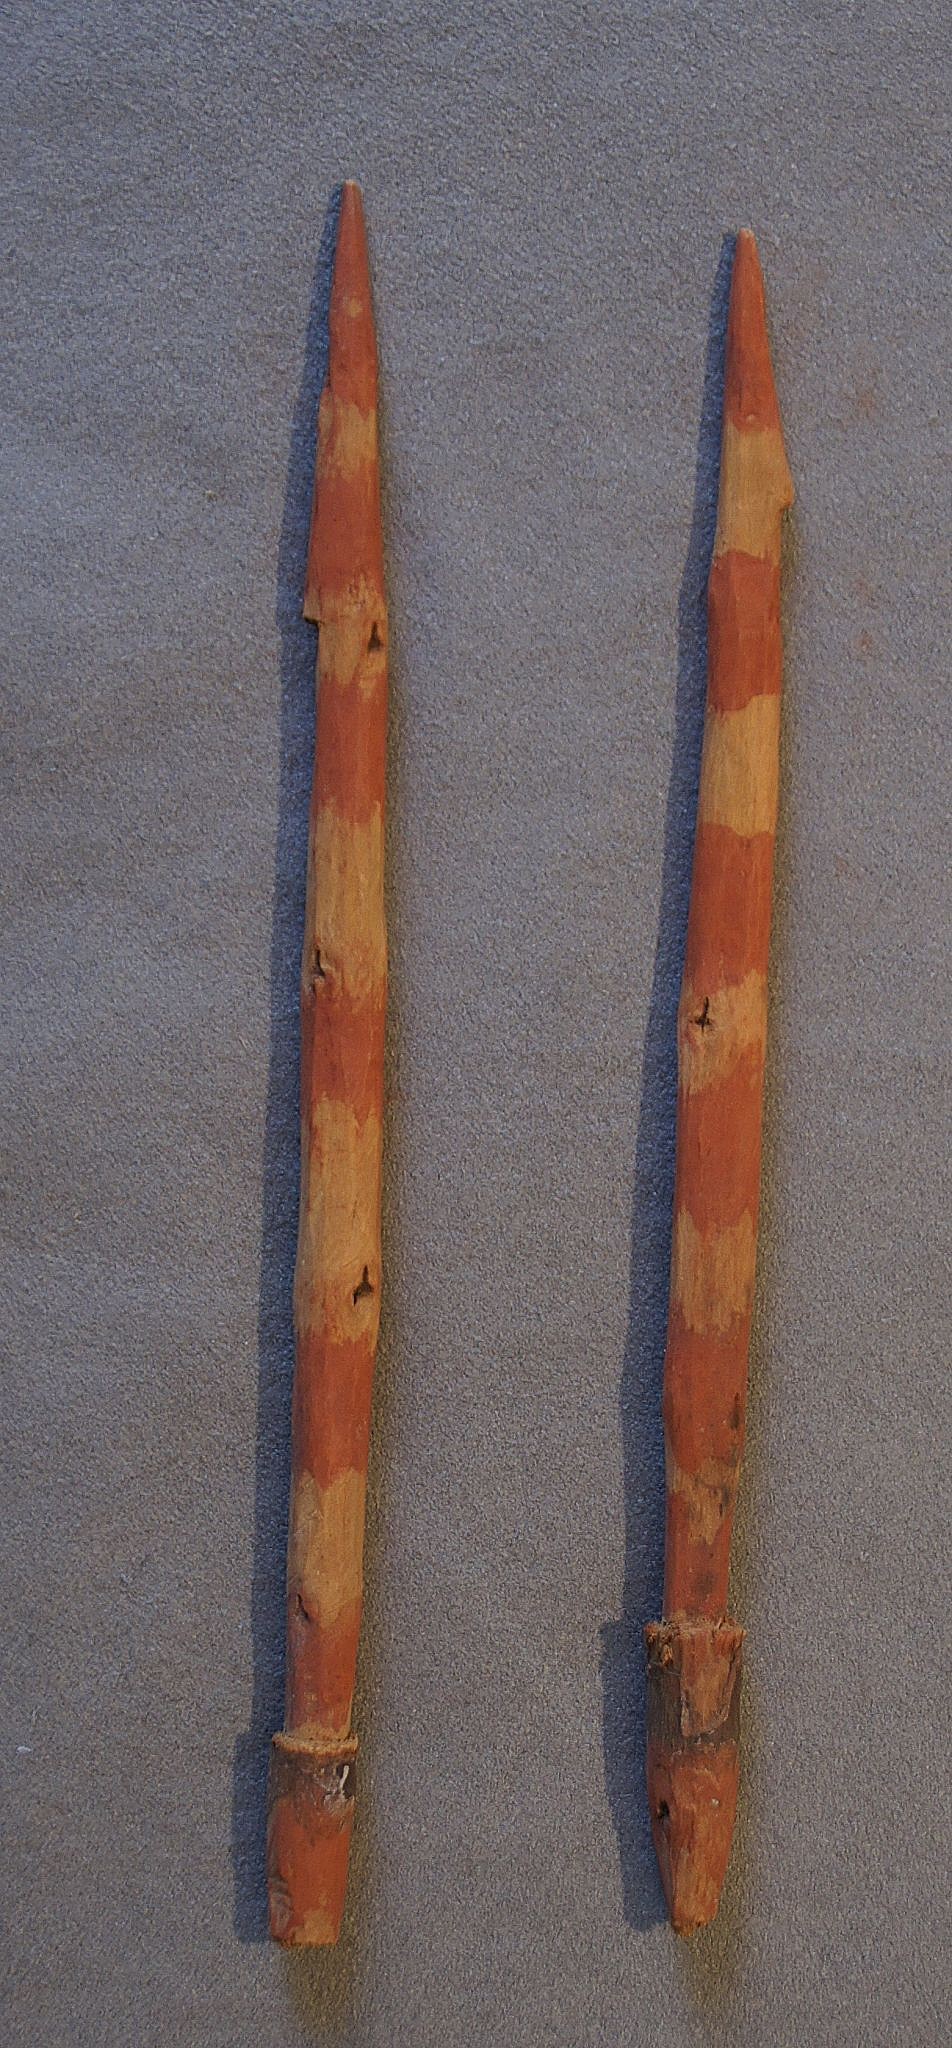 Chile, Two Early Carved Wooden Harpoon Points Painted with Red Stripes
These solid harpoon points are carved with a pointed tip and a notch to serve as a barb.  The opposite end is tapered to fit into a socketed throwing stick.  The red paint was usually used for items that were intended for use in the afterlife.
Media: Wood
Dimensions: Length: 7"
n6029